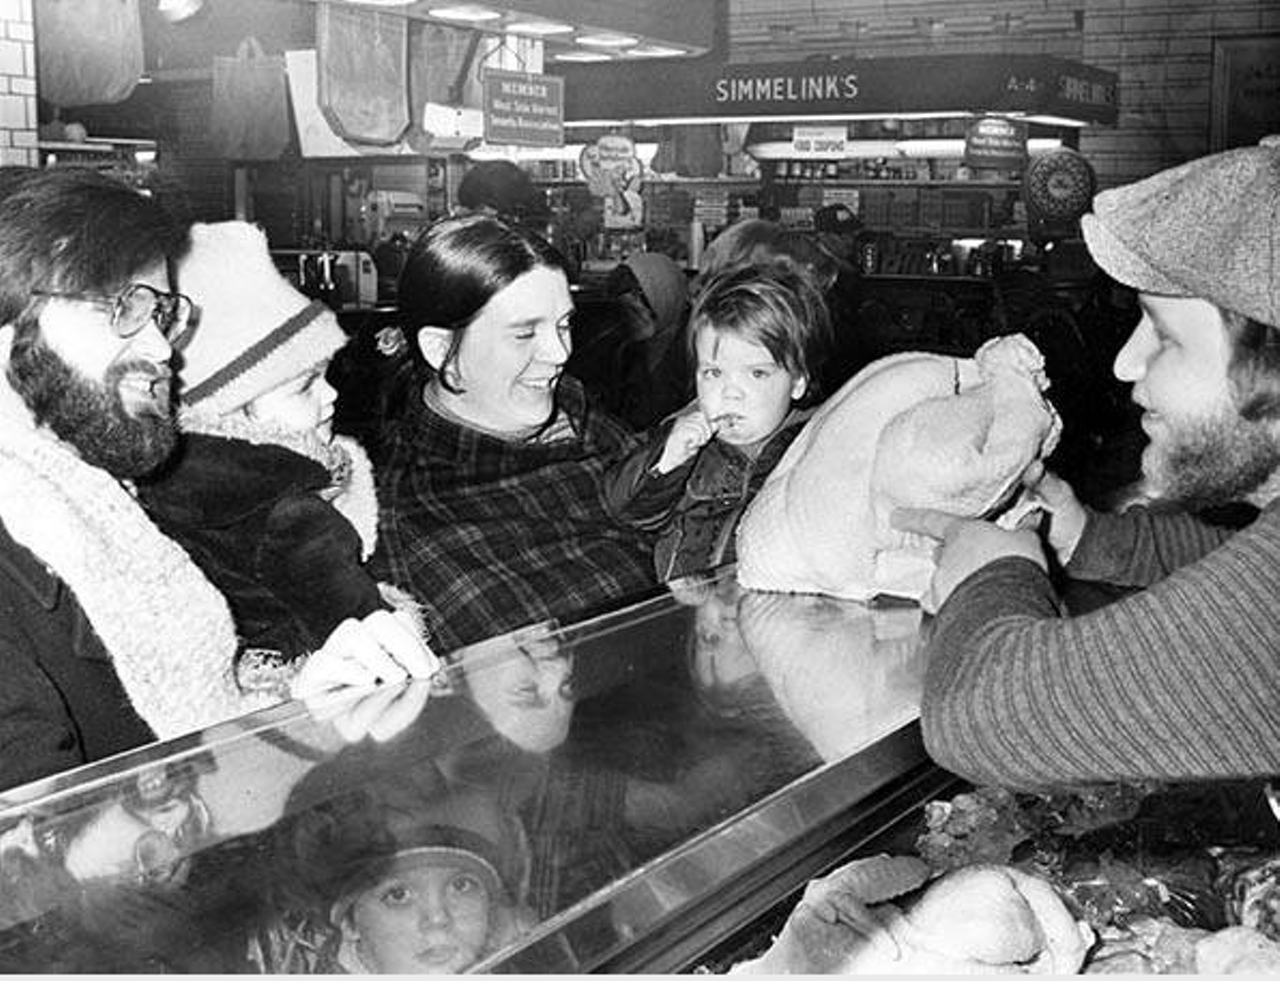 Awesome Photos of Cleveland's West Side Market from the 1970s